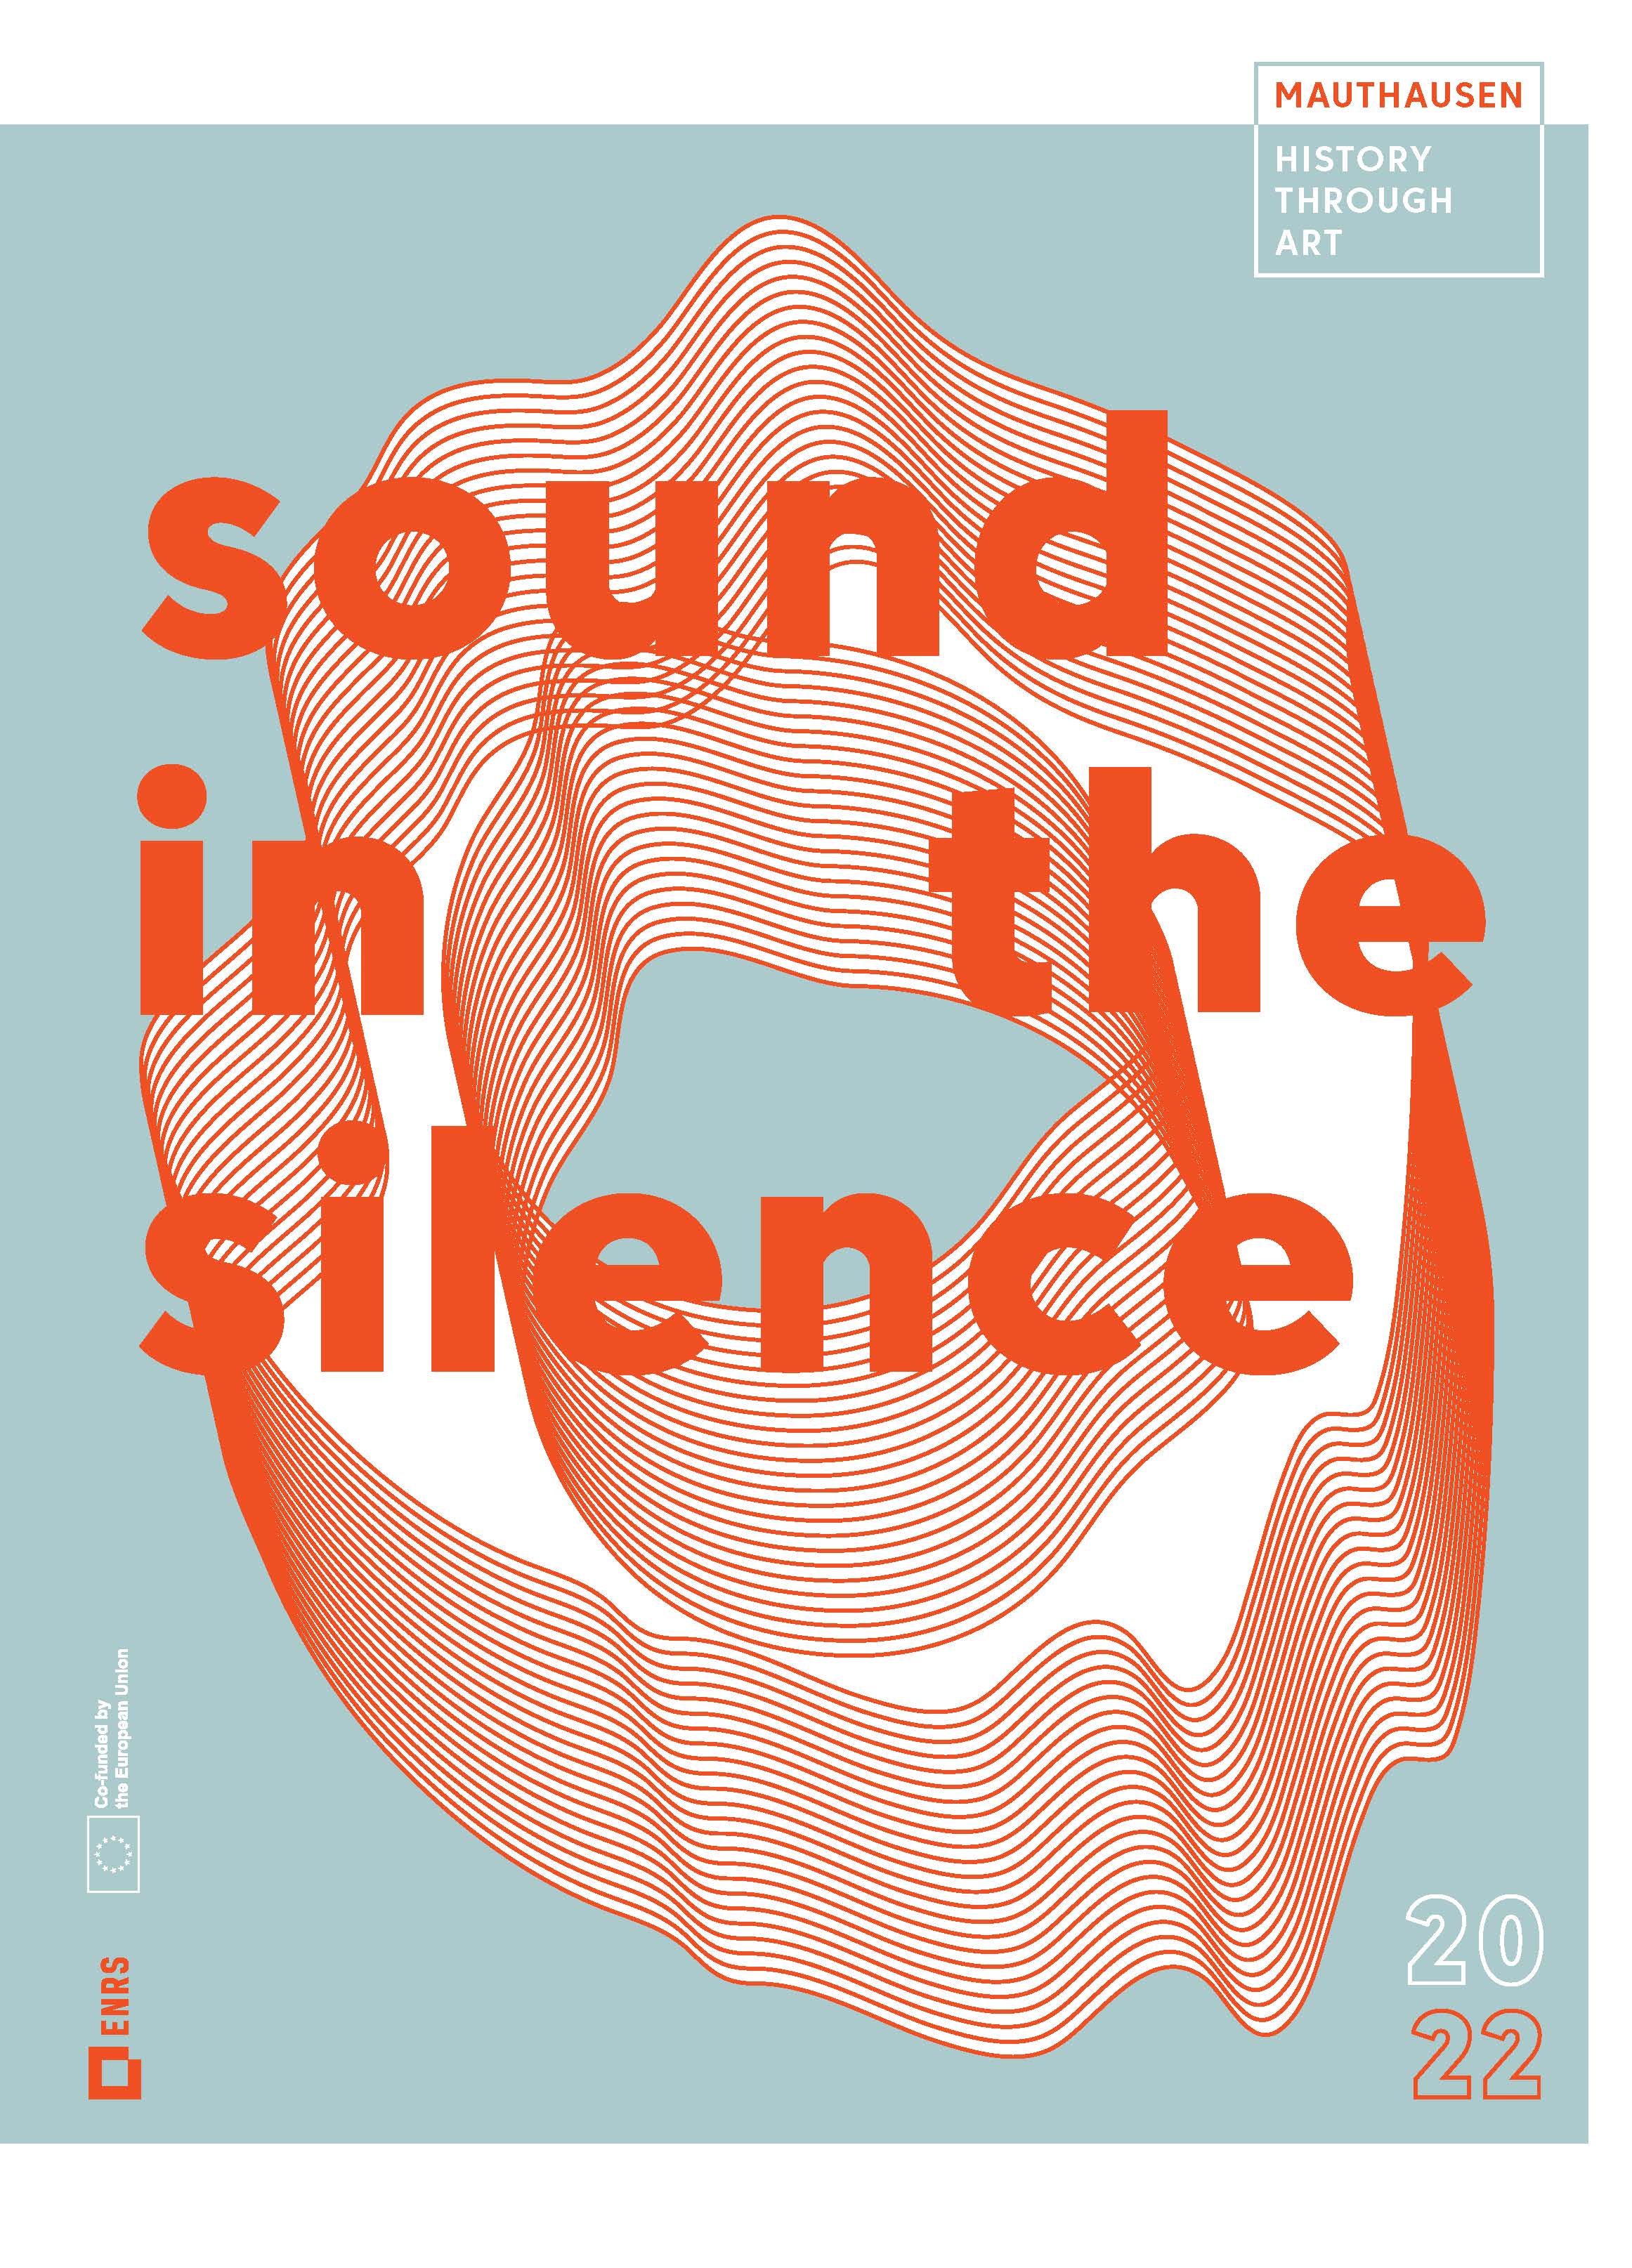 Photo of the publication Sound in the Silence Mauthausen 2022